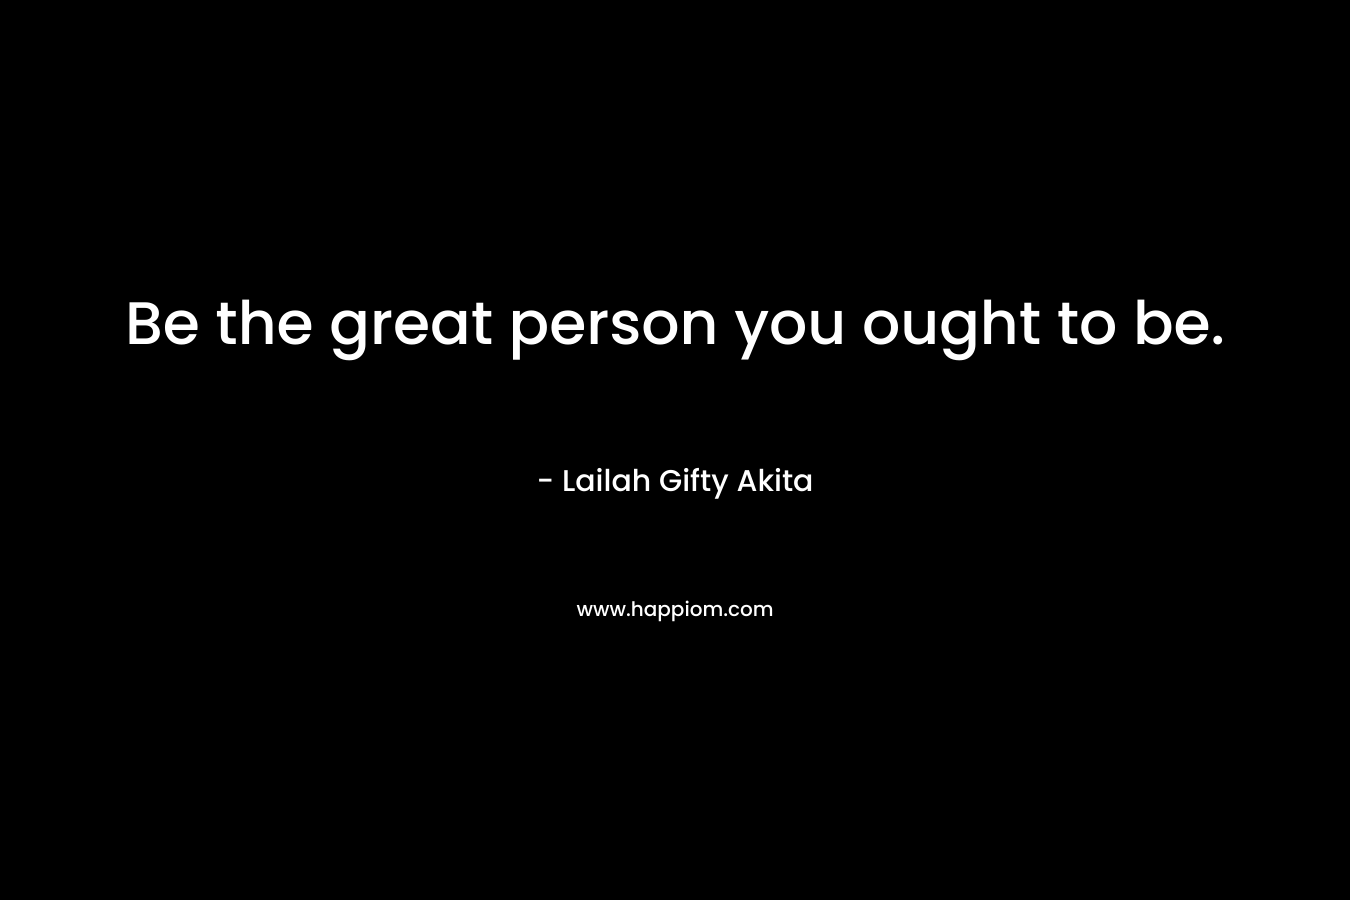 Be the great person you ought to be.